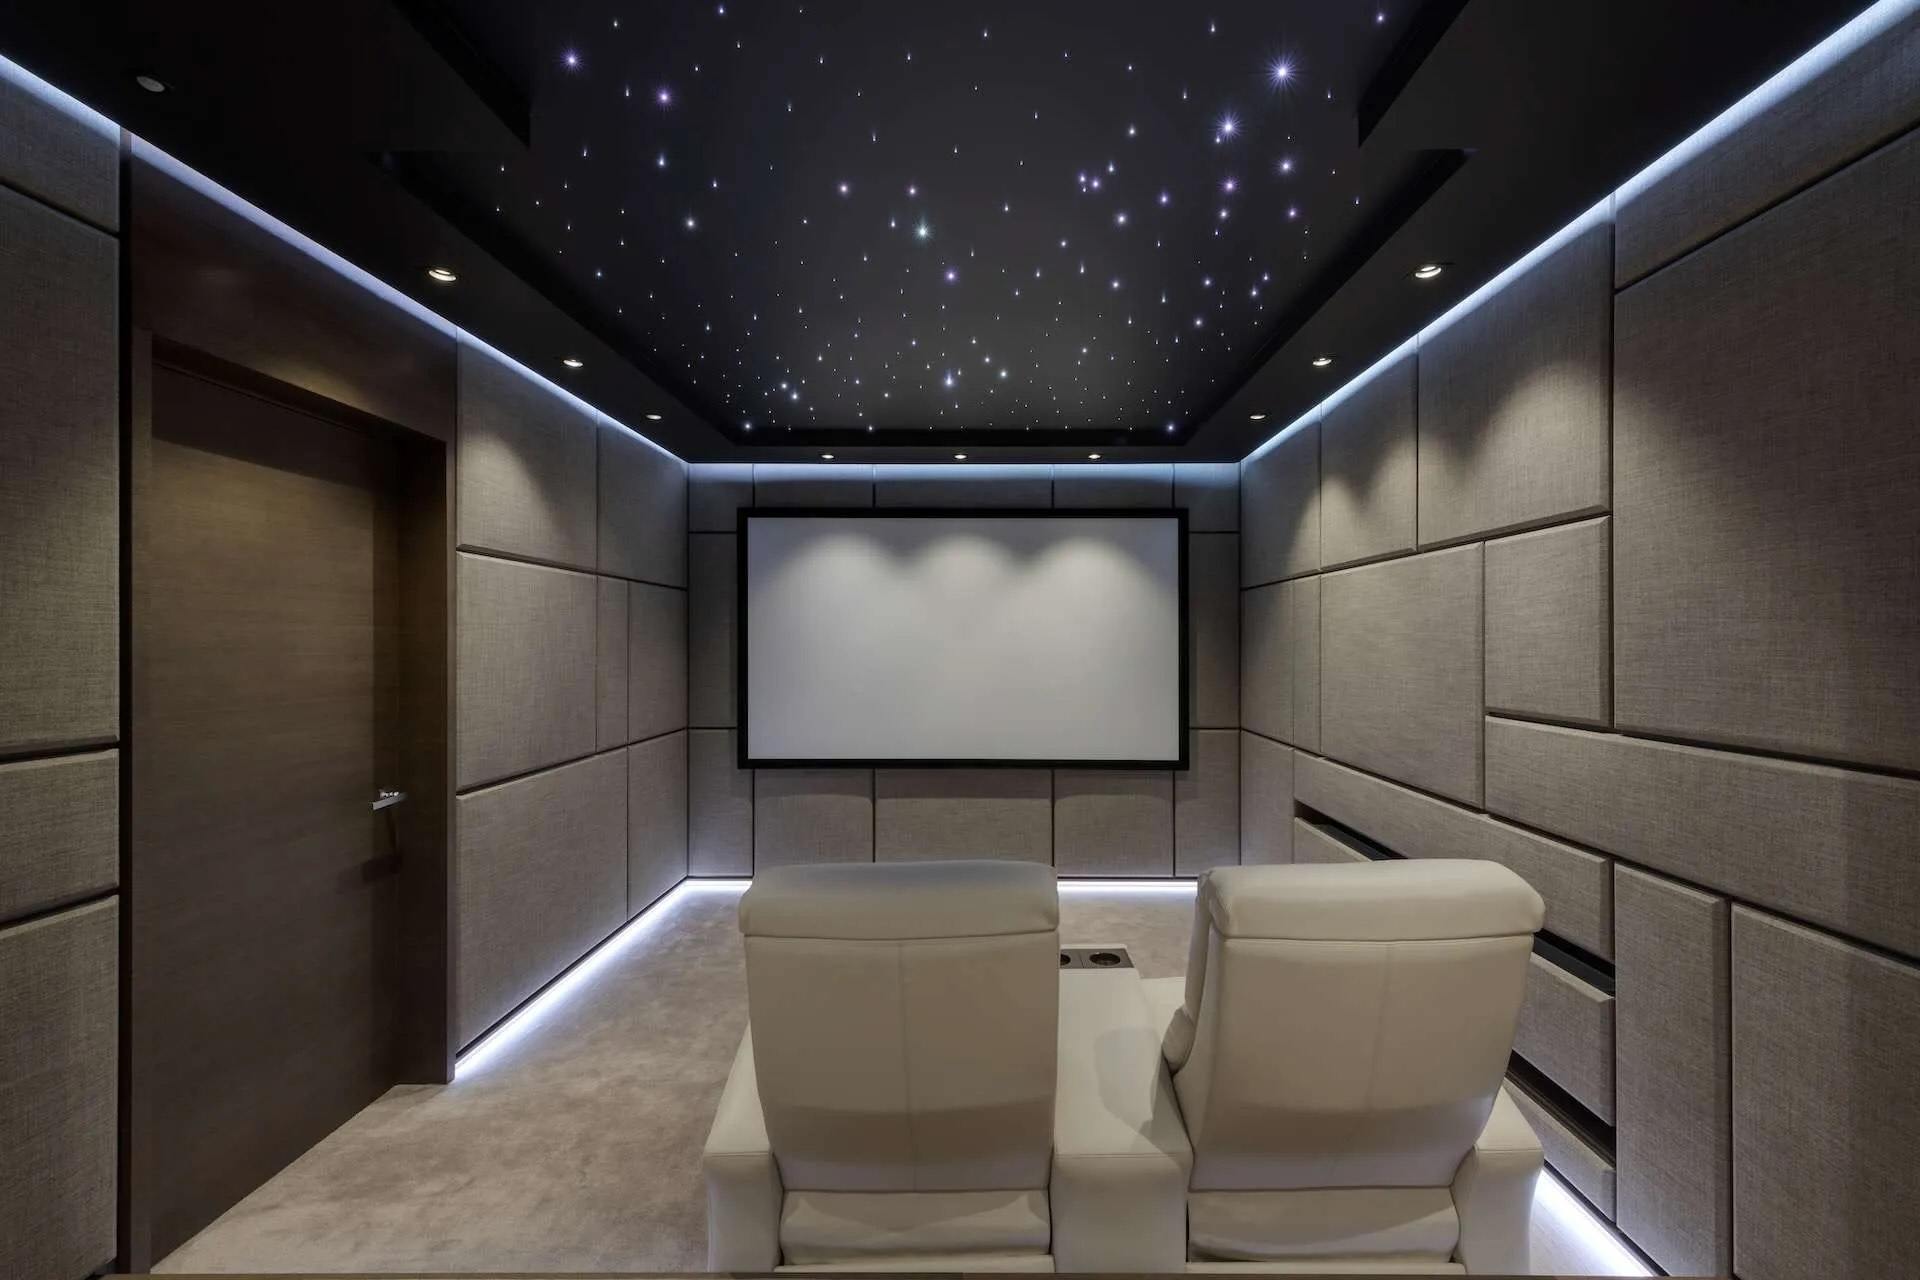 Where To Place Acoustic Panels In A Home Theater